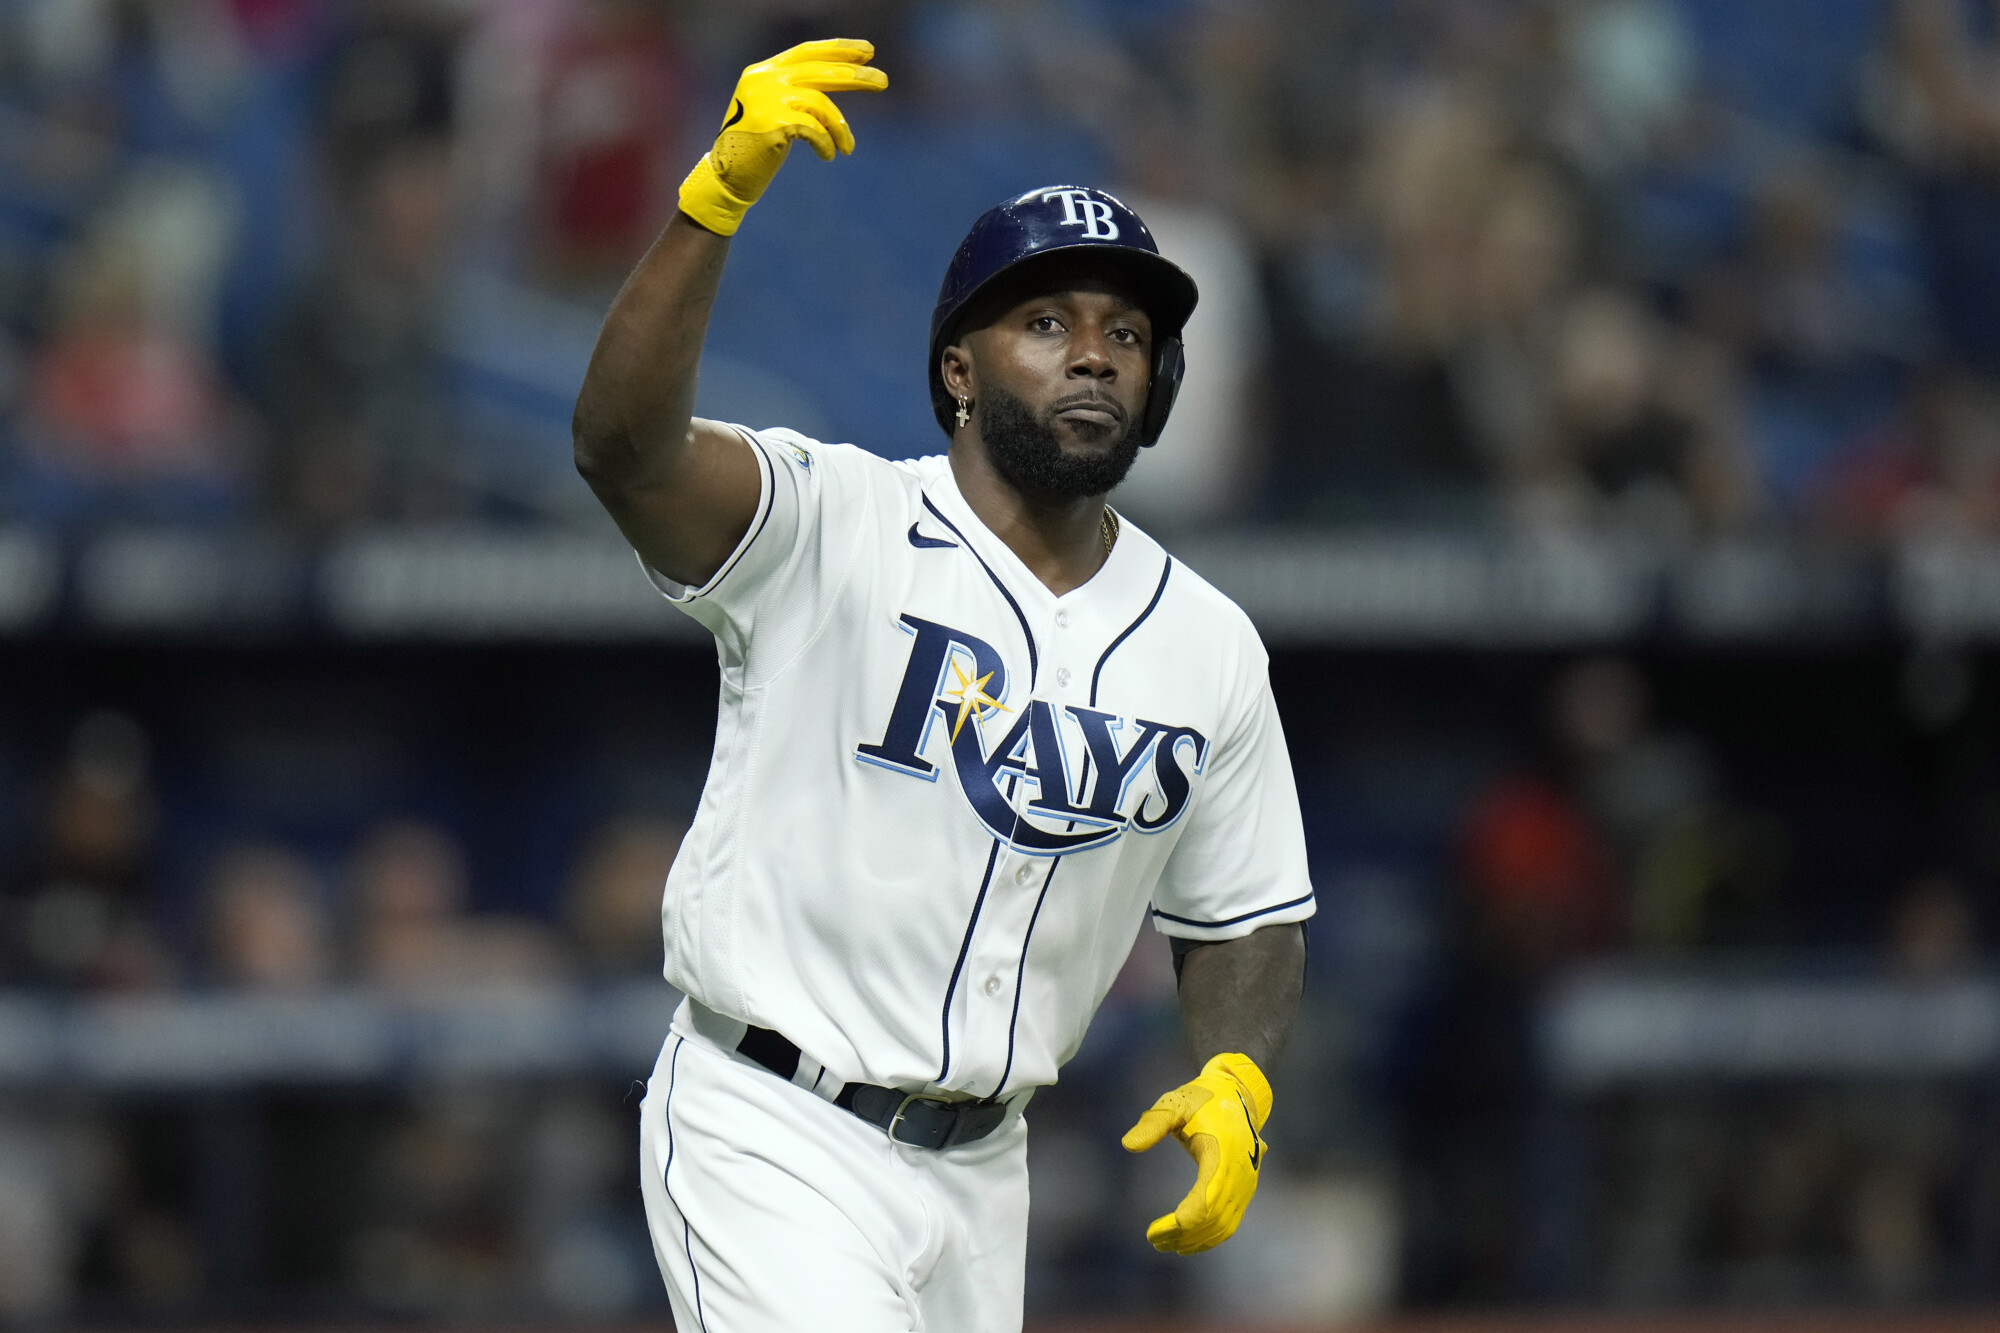 Rays top Twins 5-4 on Arozarena's 9th-inning homer to head into weekend  series vs. Orioles - The San Diego Union-Tribune